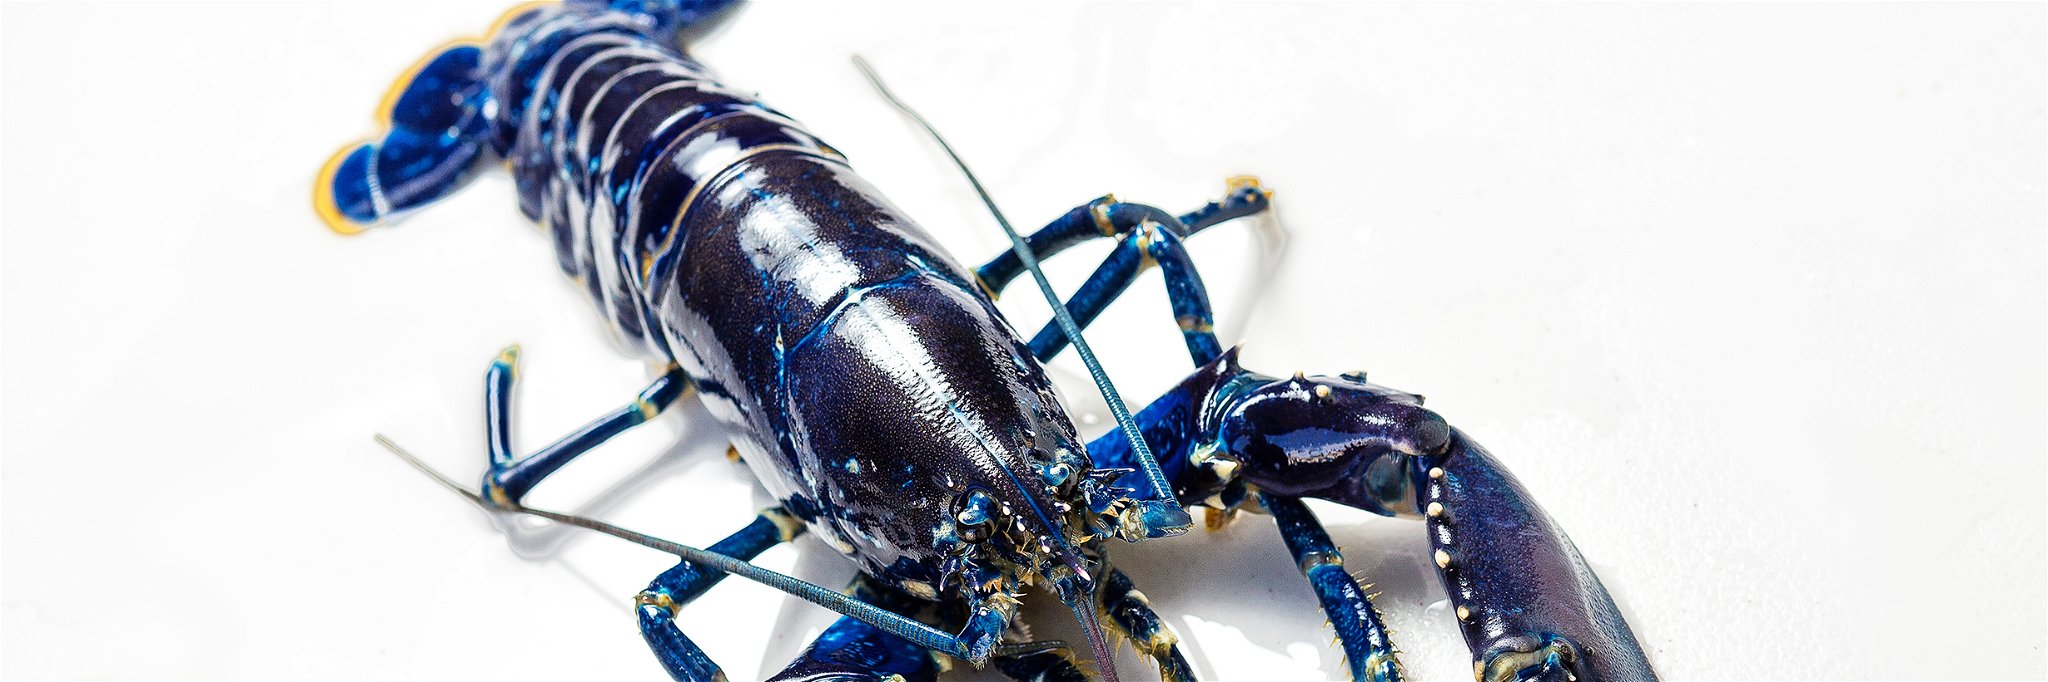 Only one in two million lobsters is blue.